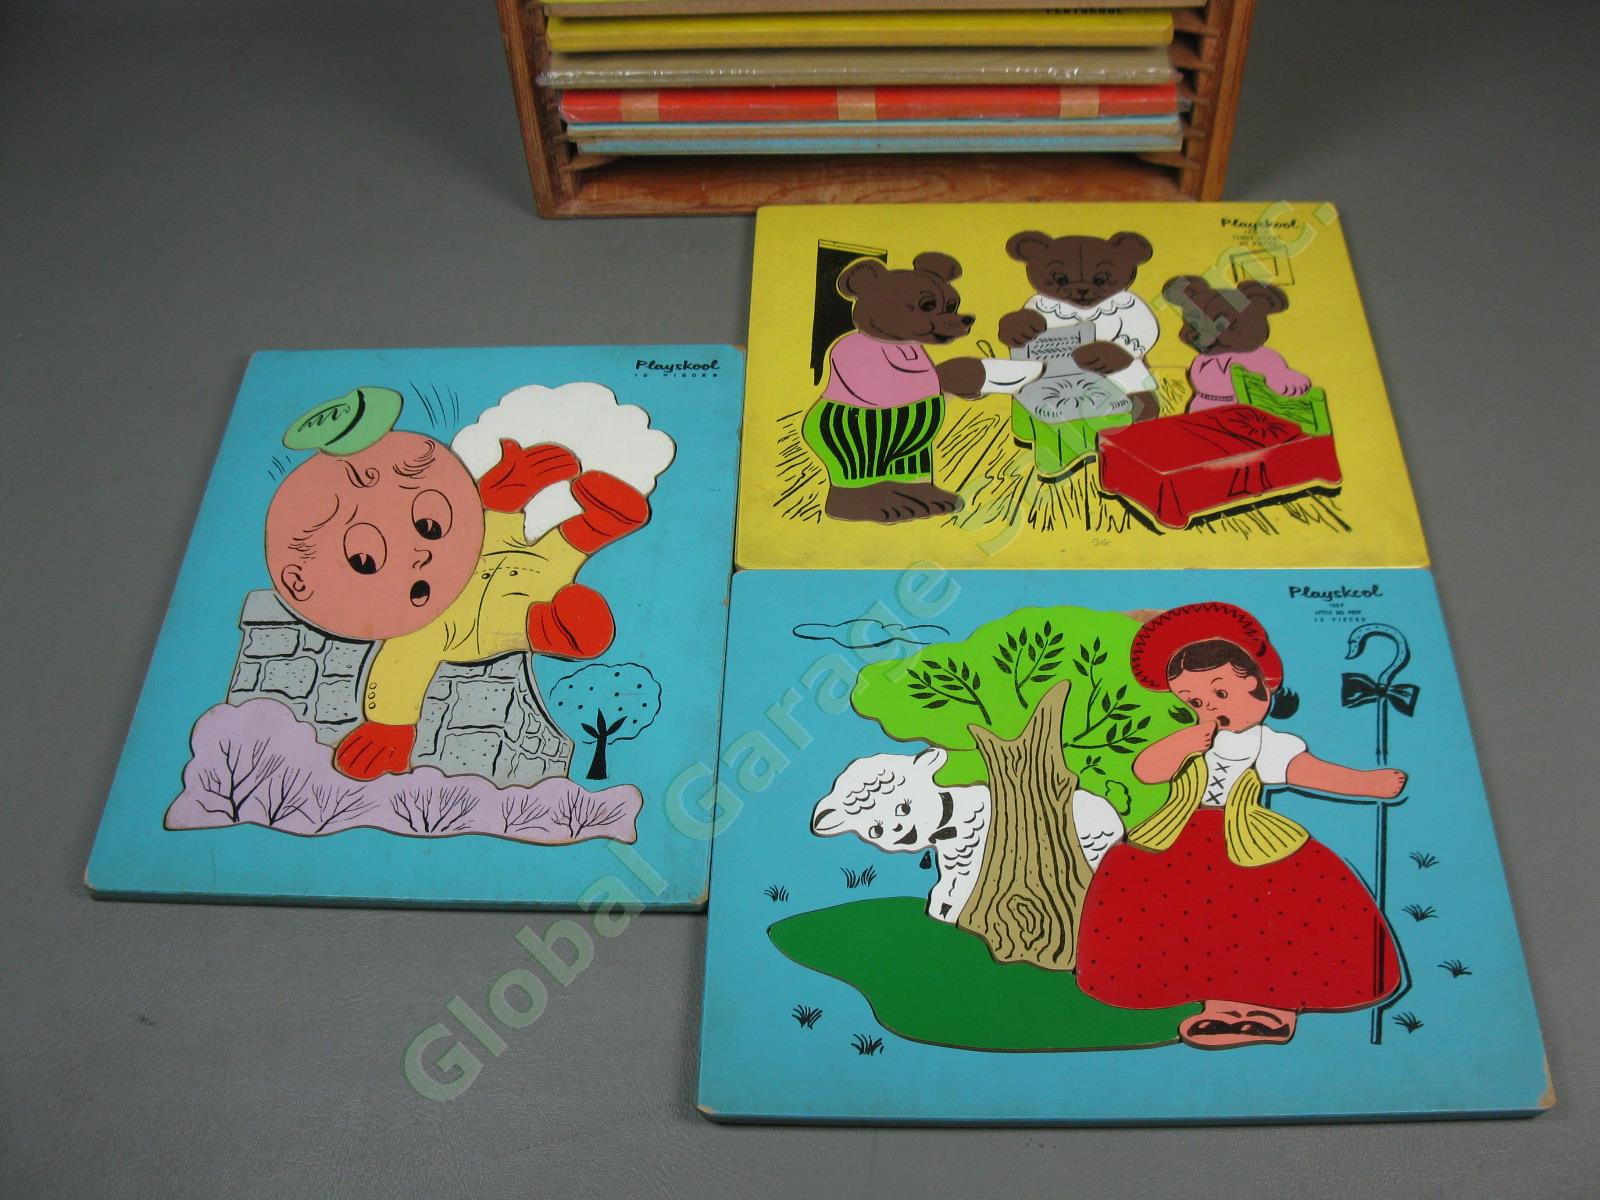 Vtg 18 Piece COMPLETE Wooden Frame Tray Jigsaw Puzzle Lot +Box Playskool Sifo NR 4